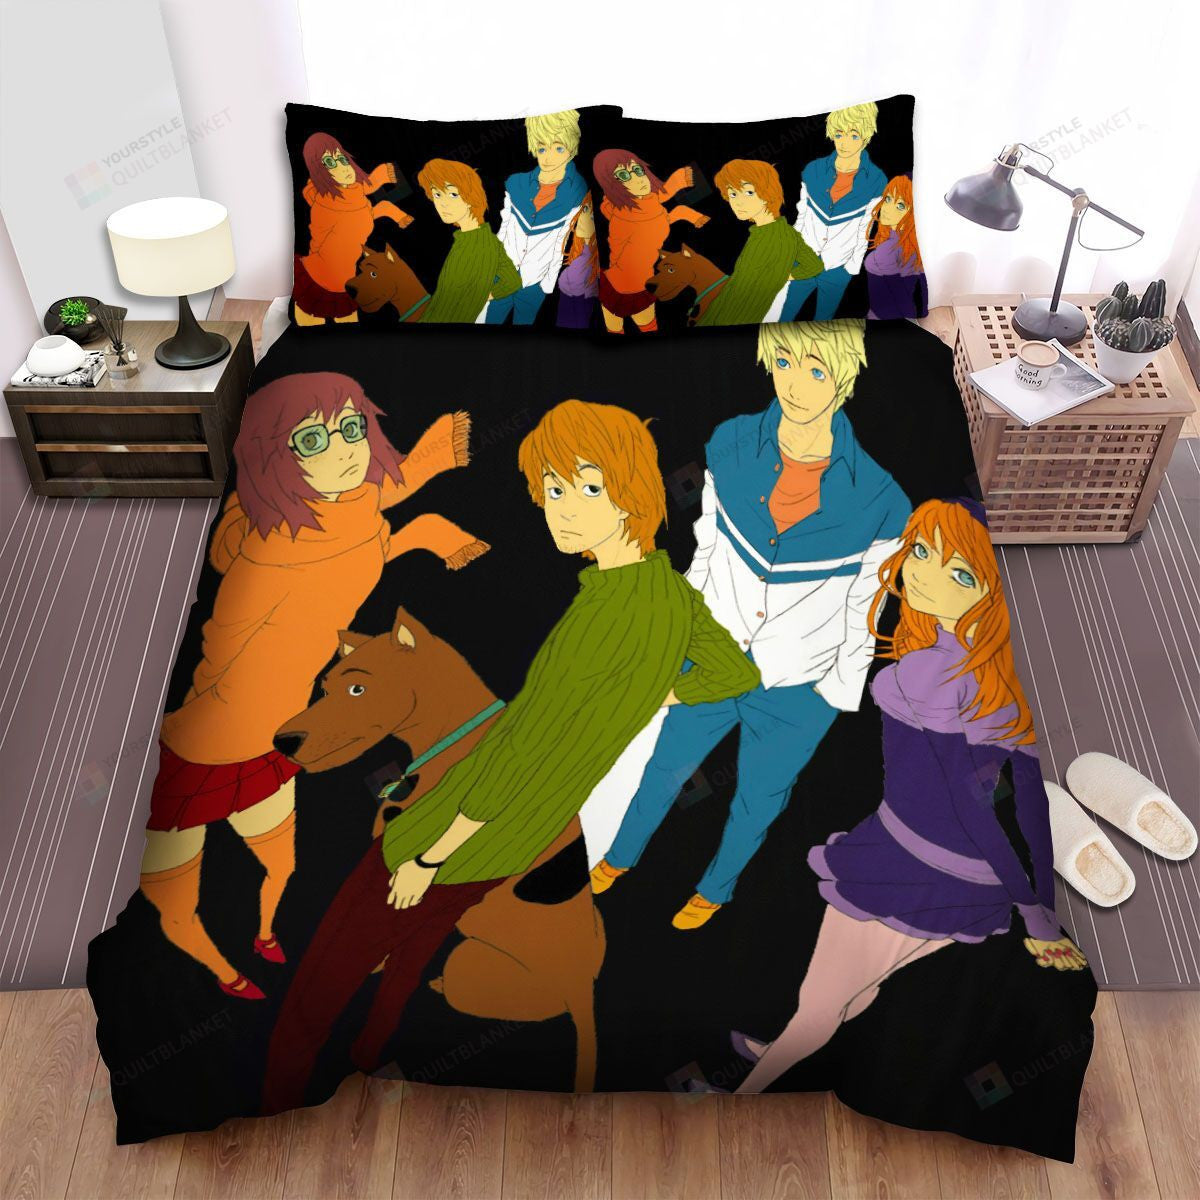 Scooby-Doo Bedding Set The Scooby-Doo Characters In Anime Style Duvet Covers Colorful Unique Gift